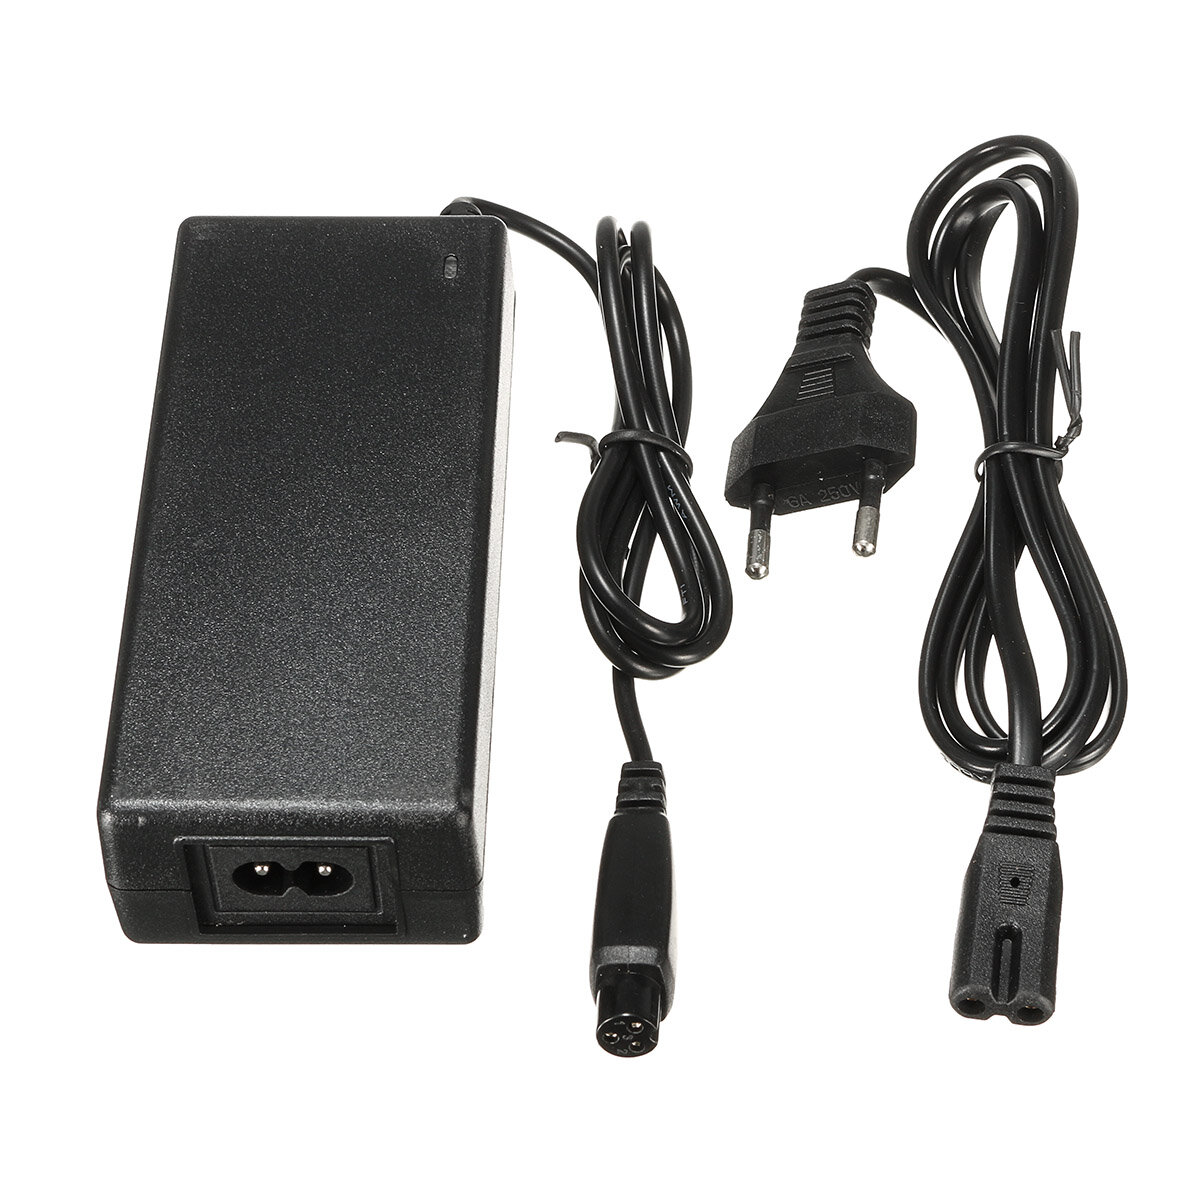 

EU UK DC 42V 2A Power Adapter Supply Plug Battery Charger